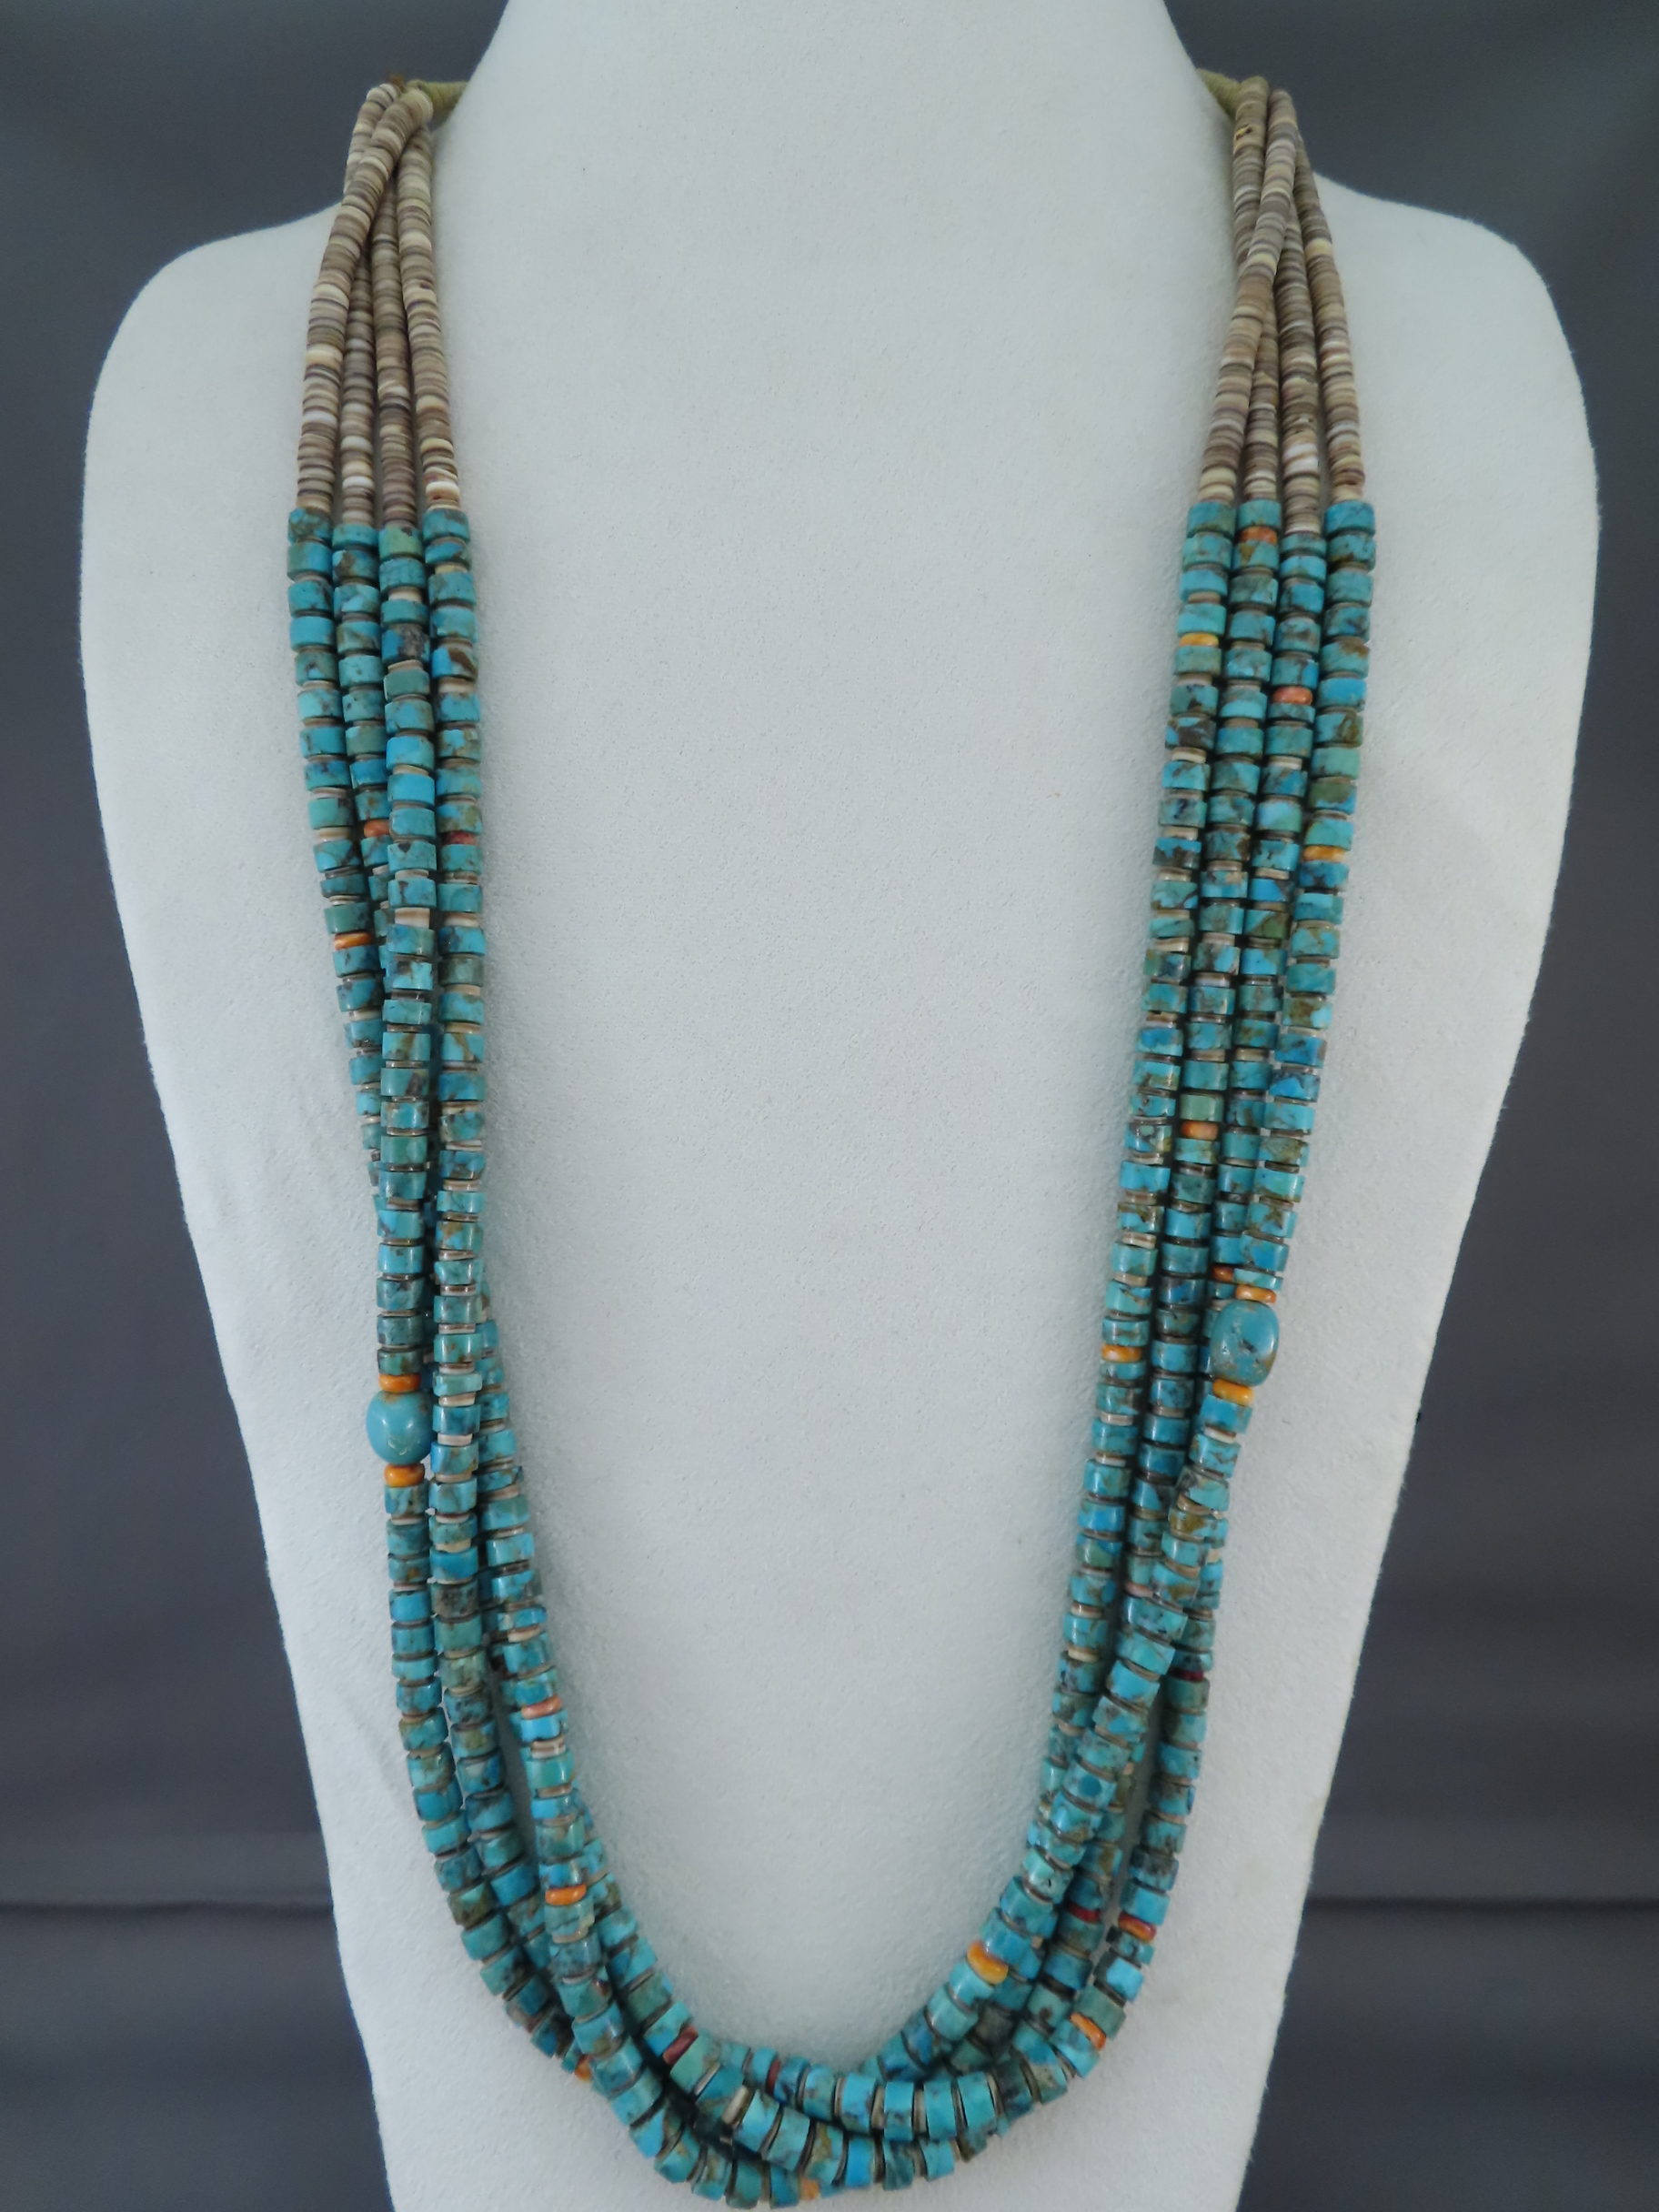 4-Strand Number Eight Turquoise Necklace with Spiny Oyster Shell Accents by Native American jewelry artist, Lita Atencio FOR SALE $875-